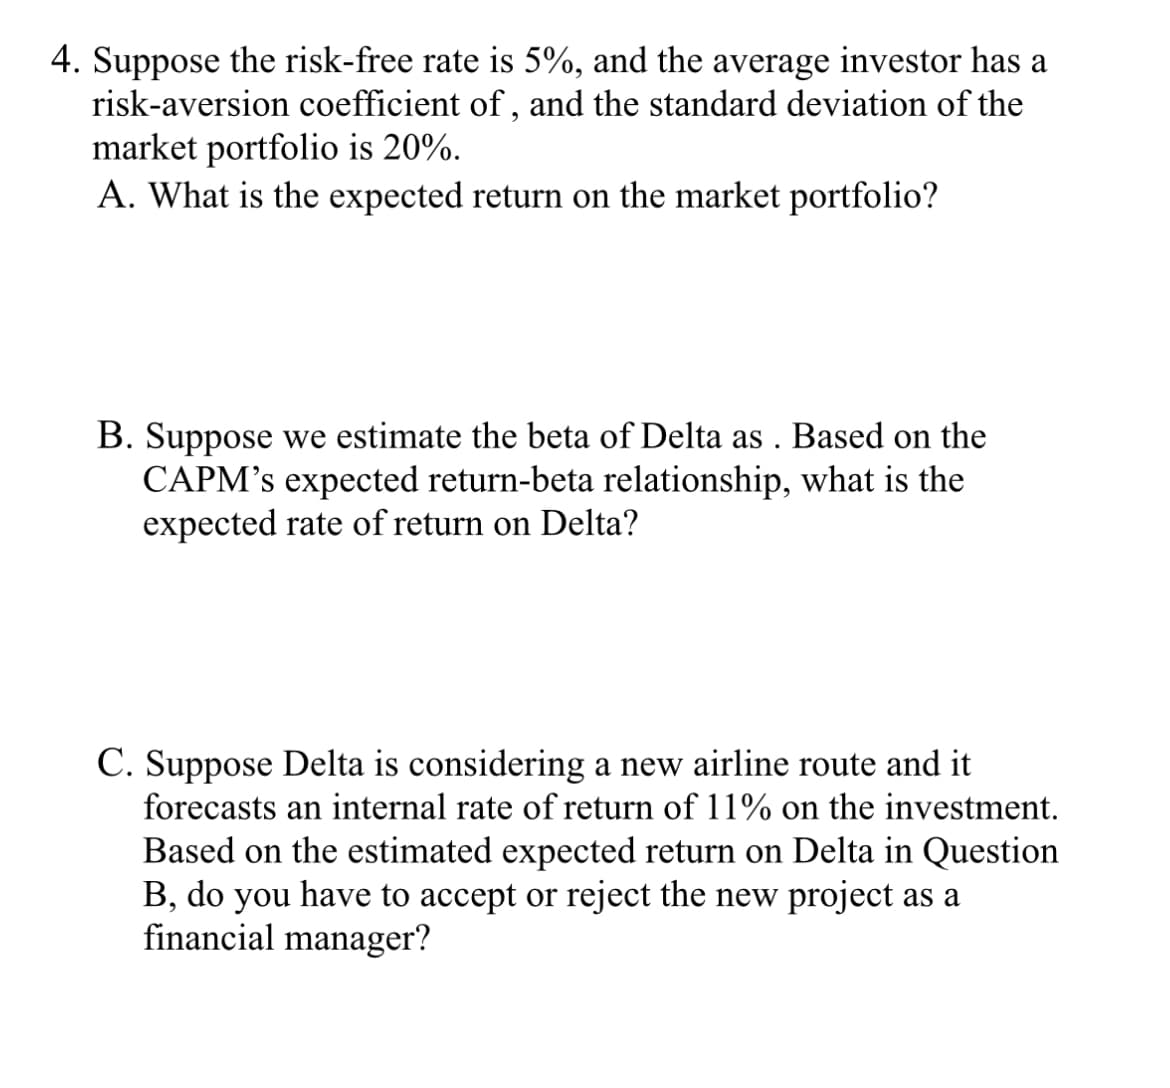 4. Suppose the risk-free rate is 5%, and the average investor has a
risk-aversion coefficient of, and the standard deviation of the
market portfolio is 20%.
A. What is the expected return on the market portfolio?
B. Suppose we estimate the beta of Delta as. Based on the
CAPM's expected return-beta relationship, what is the
expected rate of return on Delta?
C. Suppose Delta is considering a new airline route and it
forecasts an internal rate of return of 11% on the investment.
Based on the estimated expected return on Delta in Question
B, do you have to accept or reject the new project as a
financial manager?